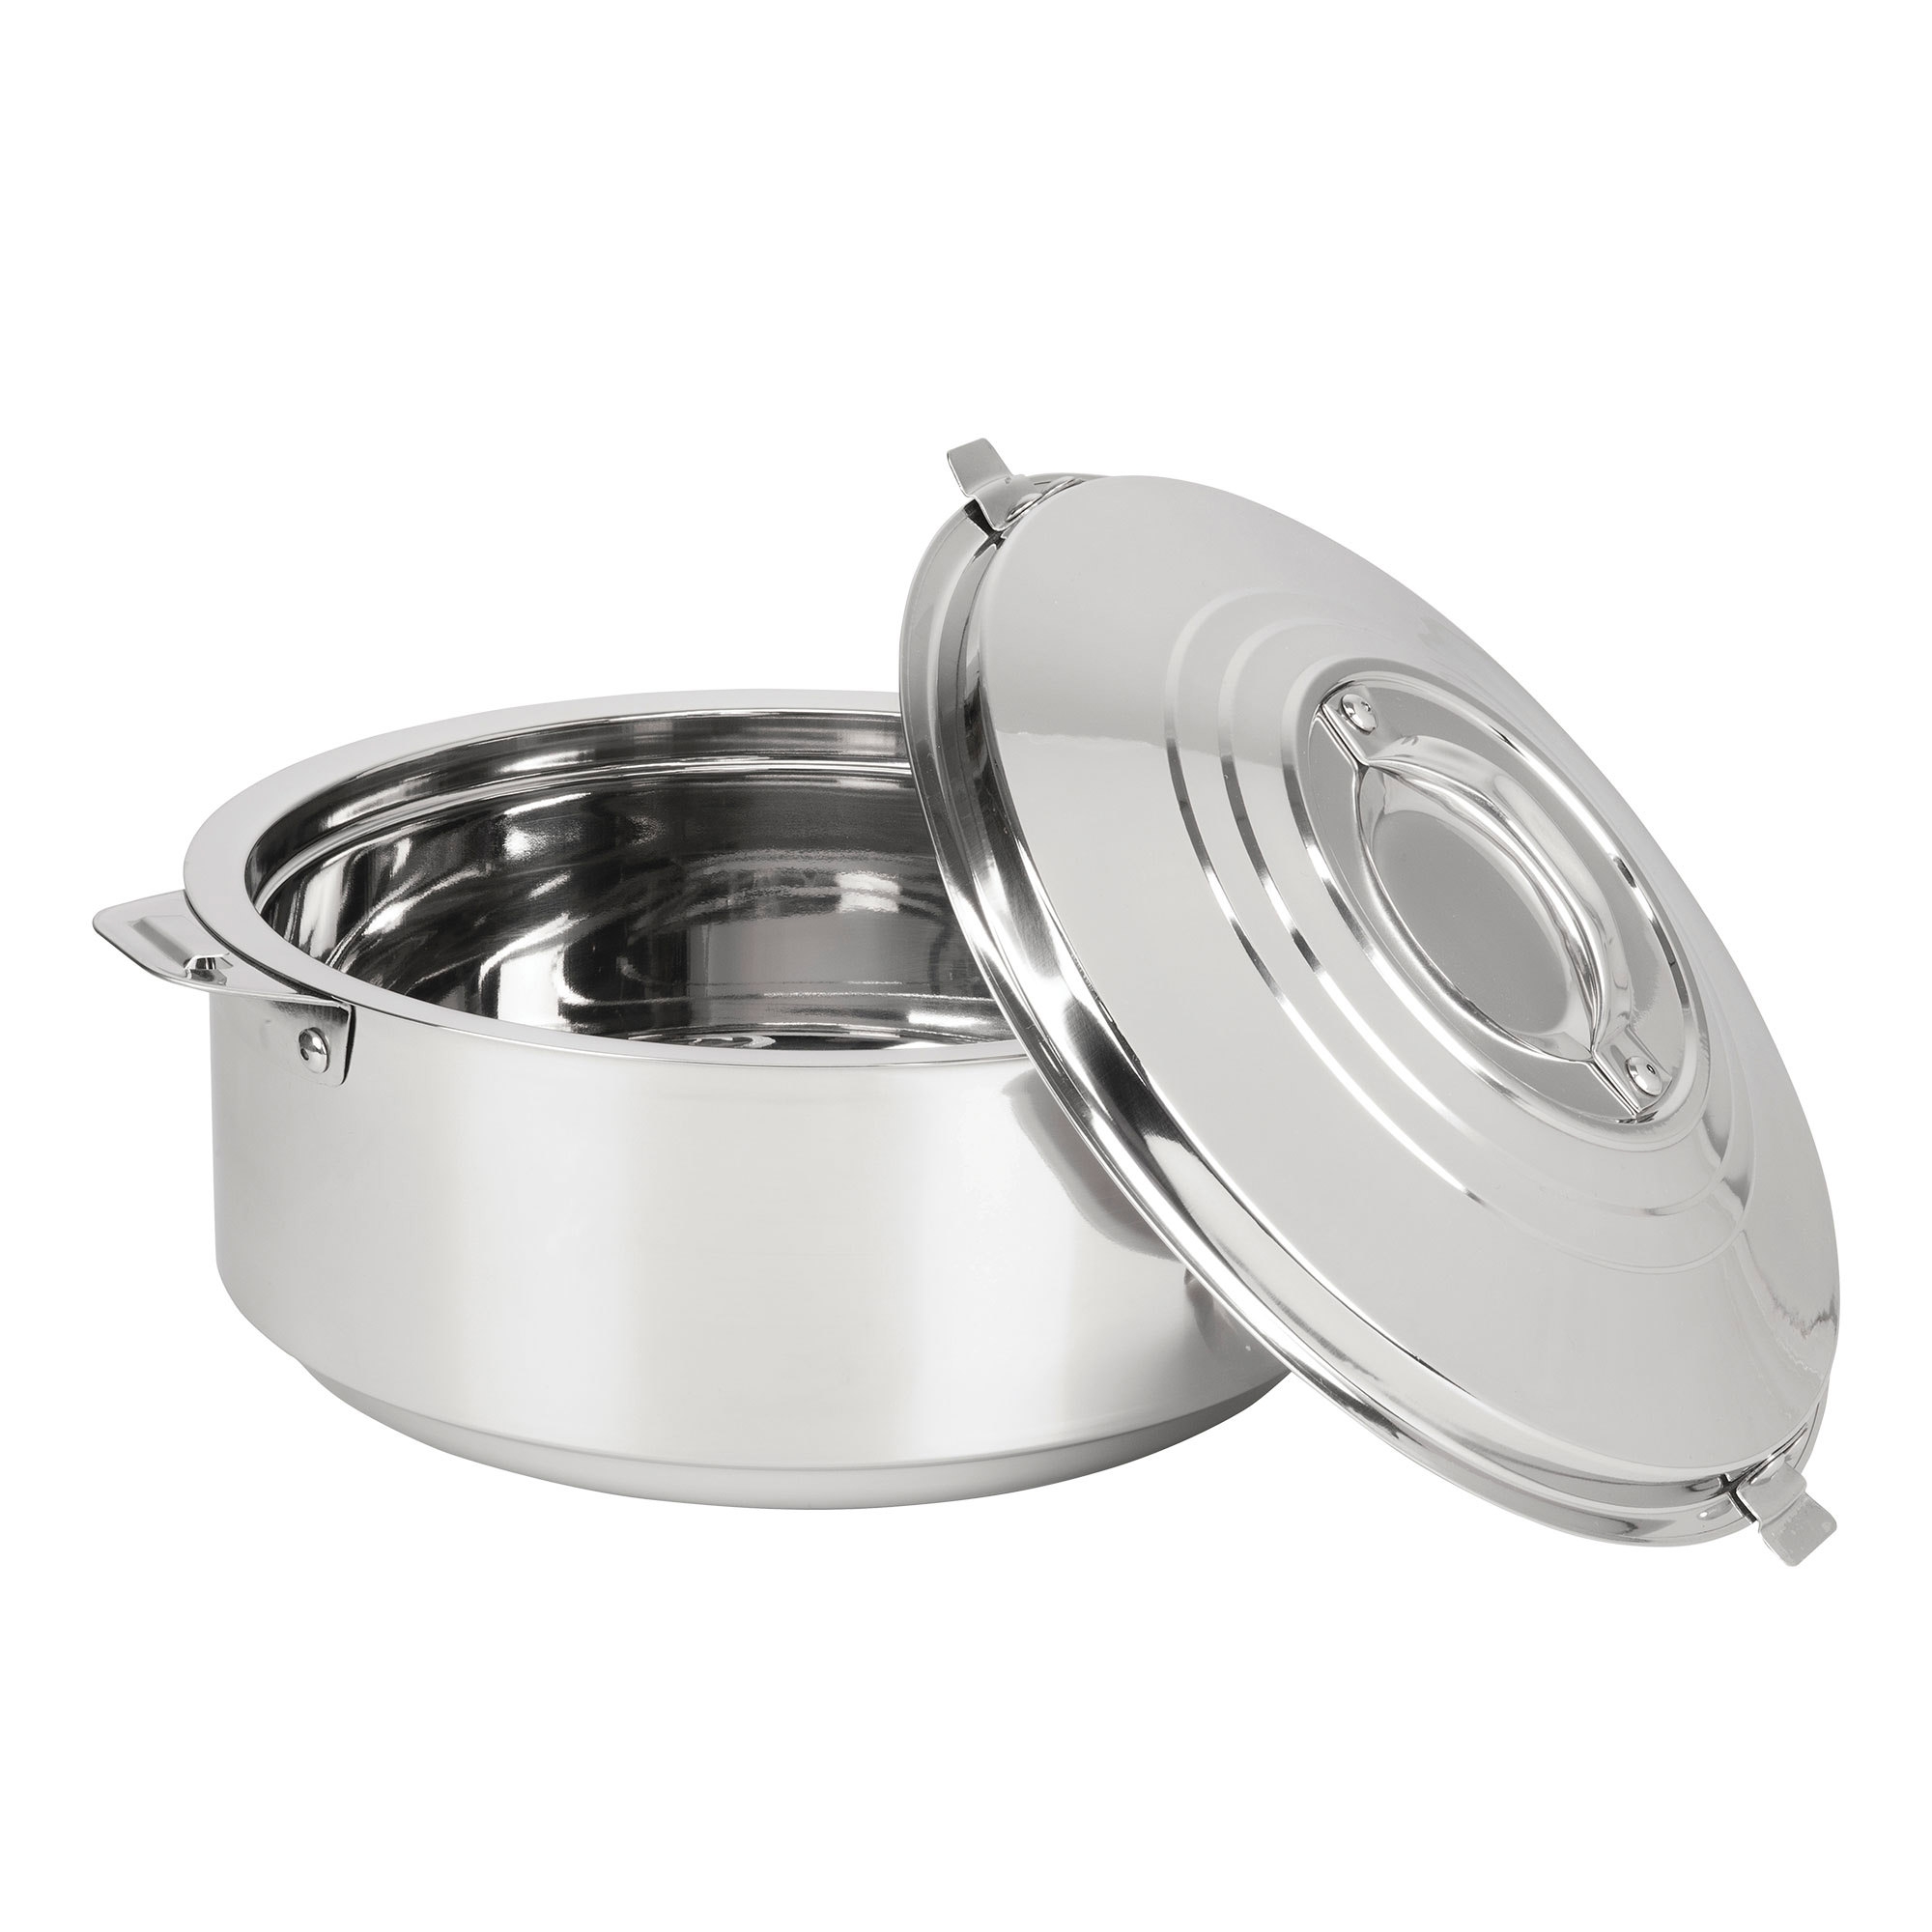 Pyrolux Stainless Steel Food Warmer 8L Image 1